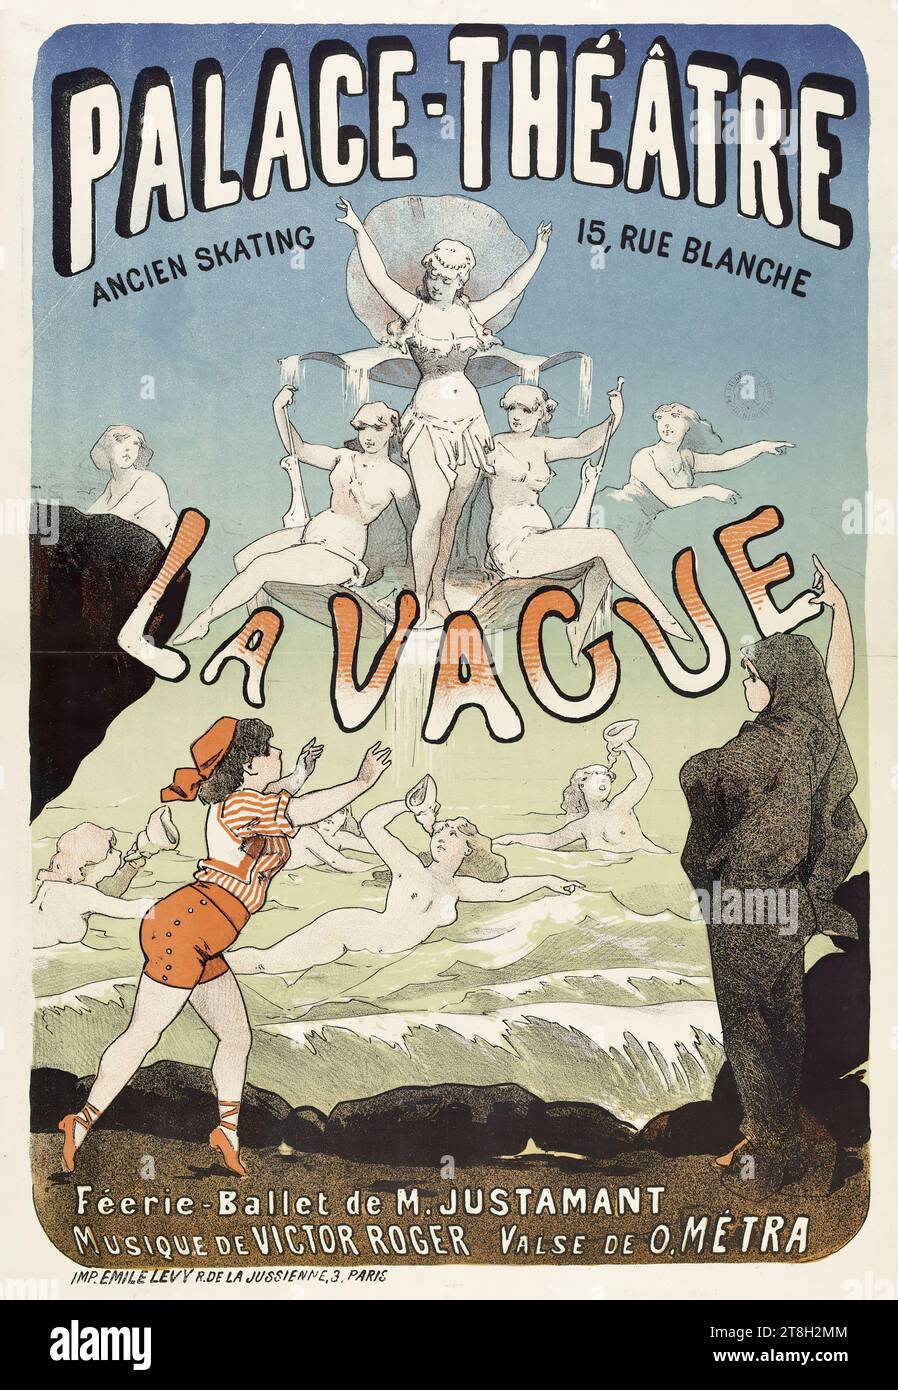 PALACE-THEATRE, OLD SKATING, 15, RUE BLANCHE, LA VAGUE, Féerie-Ballet by M. JUSTAMANT, MUSIC BY VICTOR ROGER VALSE DE O. METRA, Draftsman, Lévy, Emile, Printer, Around 1883, Graphic arts, Prints, Poster, Lithograph, Dimensions - Work: Height: 59.5 cm, Width: 41.5 cm Stock Photo